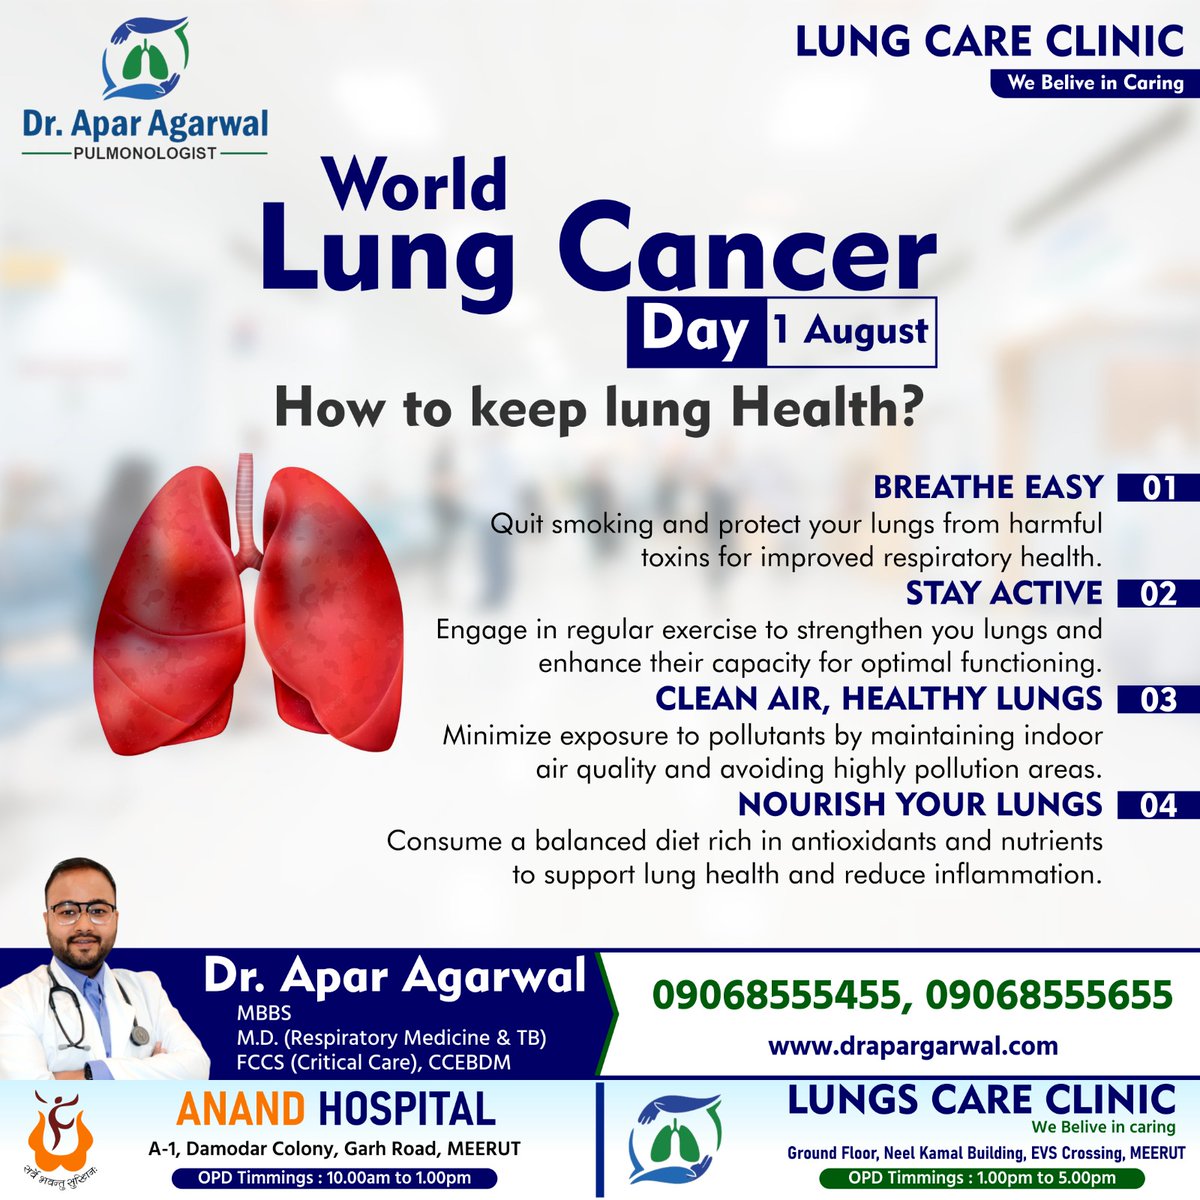 𝐖𝐨𝐫𝐥𝐝 𝐋𝐔𝐍𝐆 𝐂𝐀𝐍𝐂𝐄𝐑 𝐃𝐚𝐲🎗 #DrAparAgarwal #lung #health #medical #medicine #lungdisease #pulmonary #lungs #pulmonologist #lunghealth #cardiology #physicianlife #doctor #copd #doctors #lungscancer #quitsmoking #WorldLungCancerDay #LungCancerAwareness